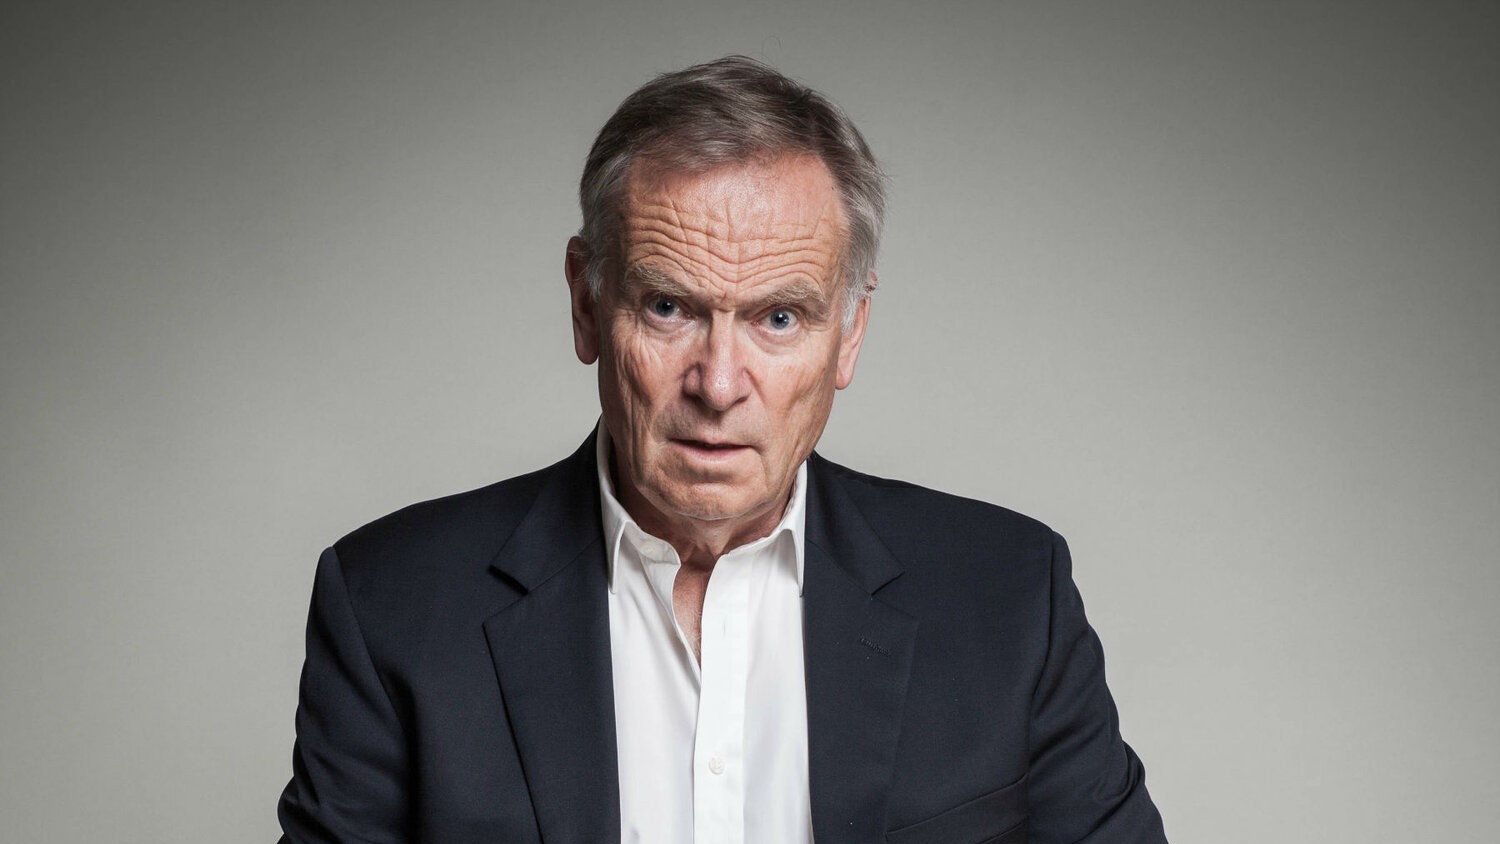 British Author Jeffrey Archer’s Novels to Be Adapted for Film, TV in Asia, Middle East